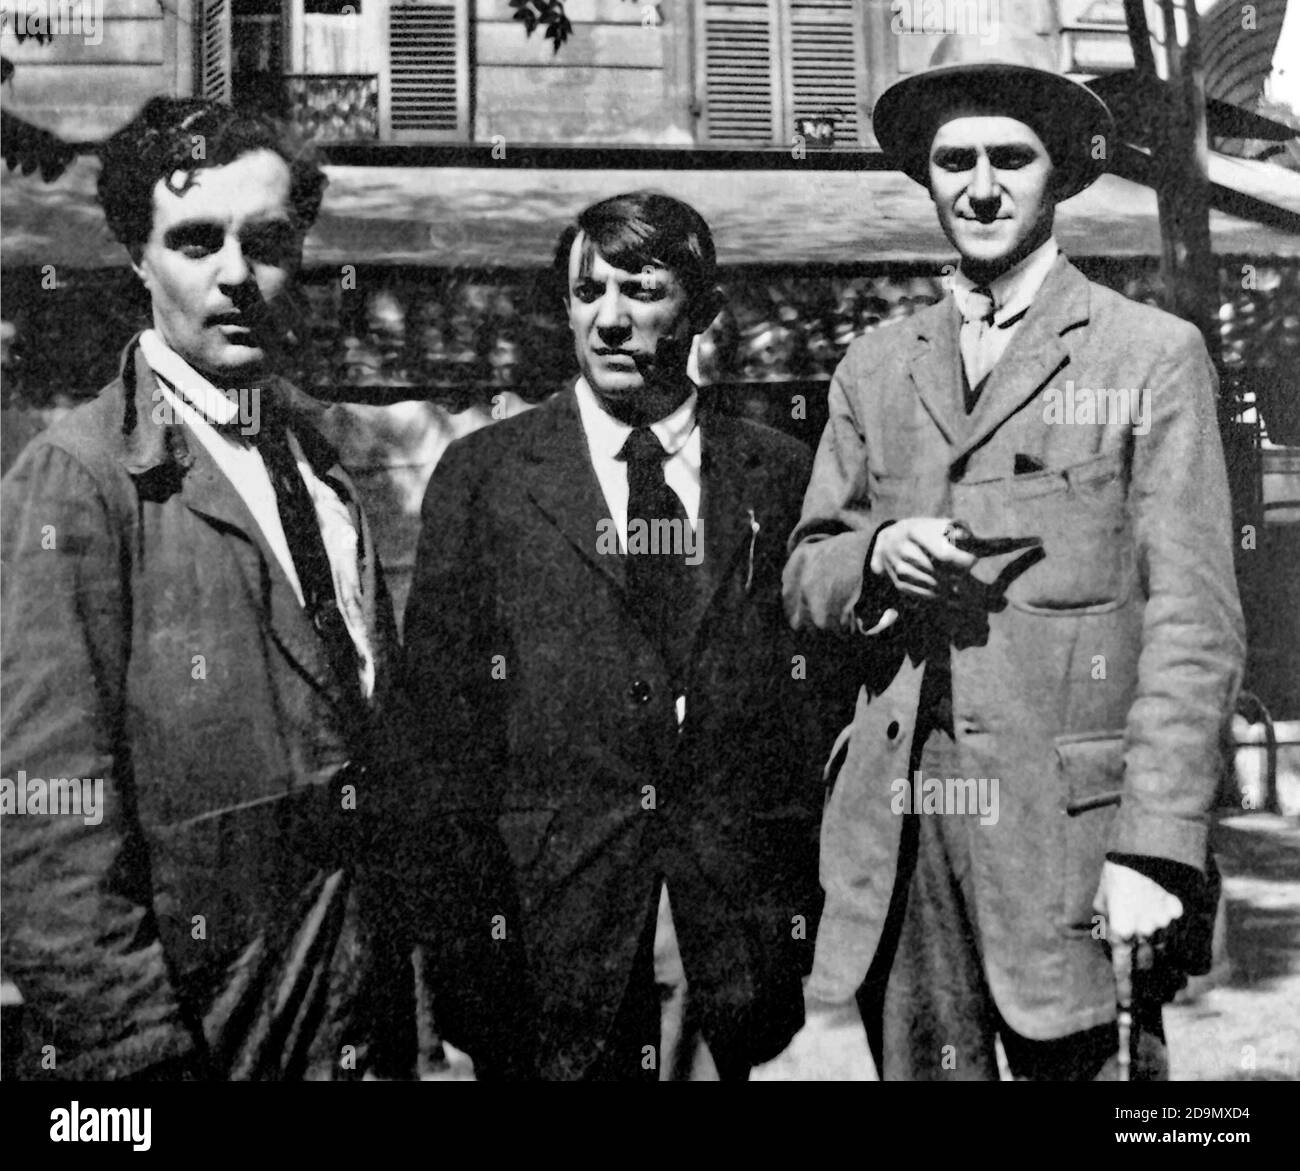 Modigliani, Picasso and André Salmon. Photograph of Amedeo Clemente Modigliani, Pablo Picasso and André Salmon in front of the Café de la Rotonde in Paris. Image taken by Jean Cocteau, c.1915 Stock Photo